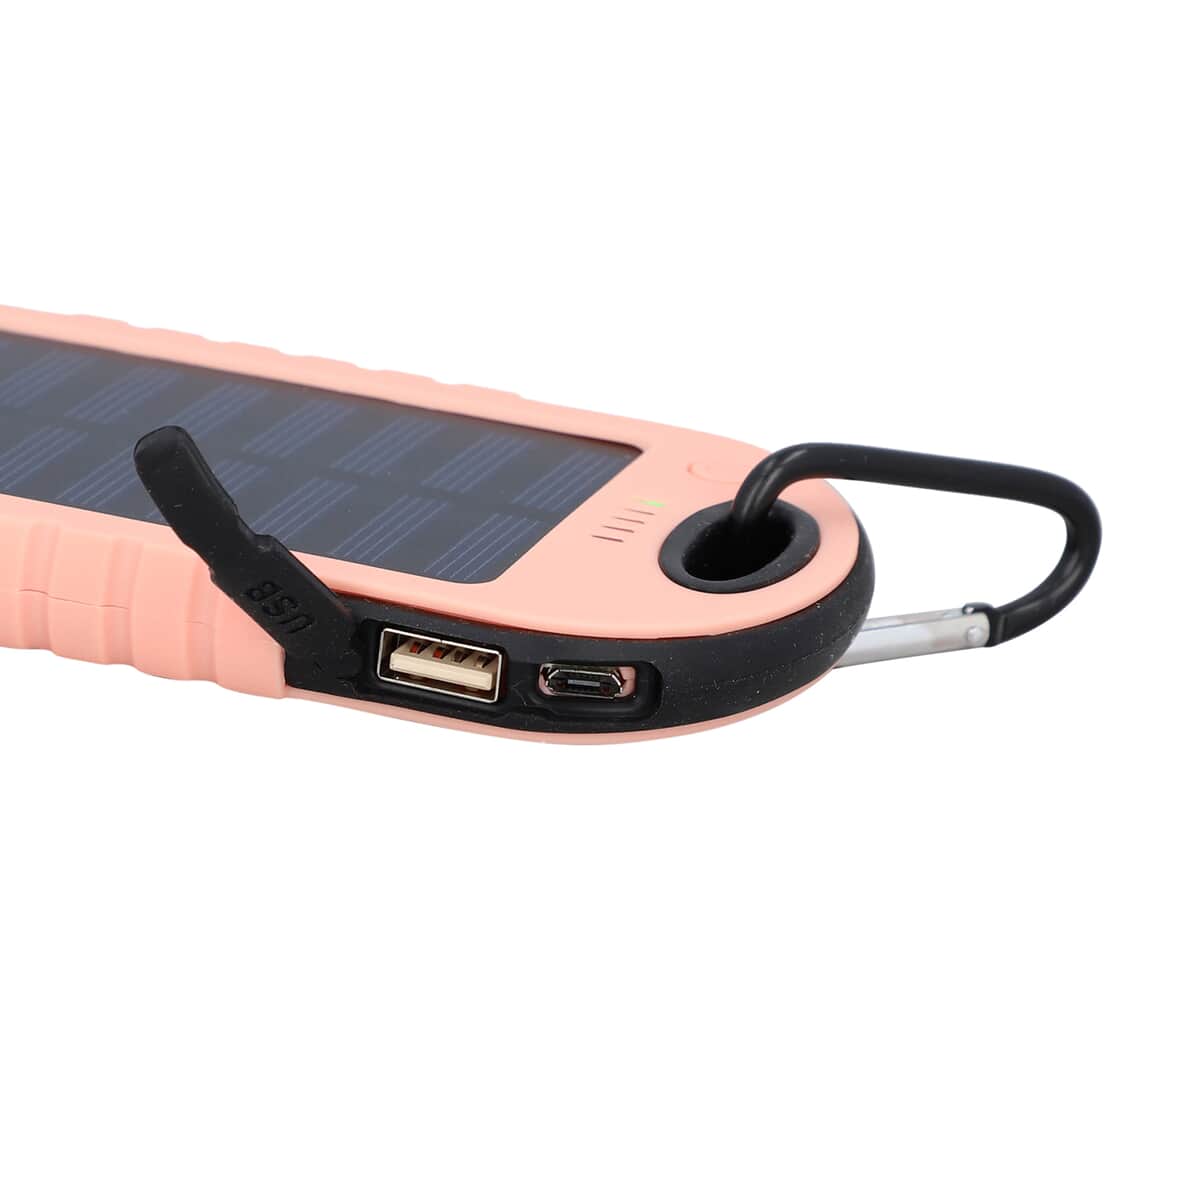 Homesmart Blush Carabiner Solar 5000 mAh Battery Charger with USB & Emergency LED Torch image number 4